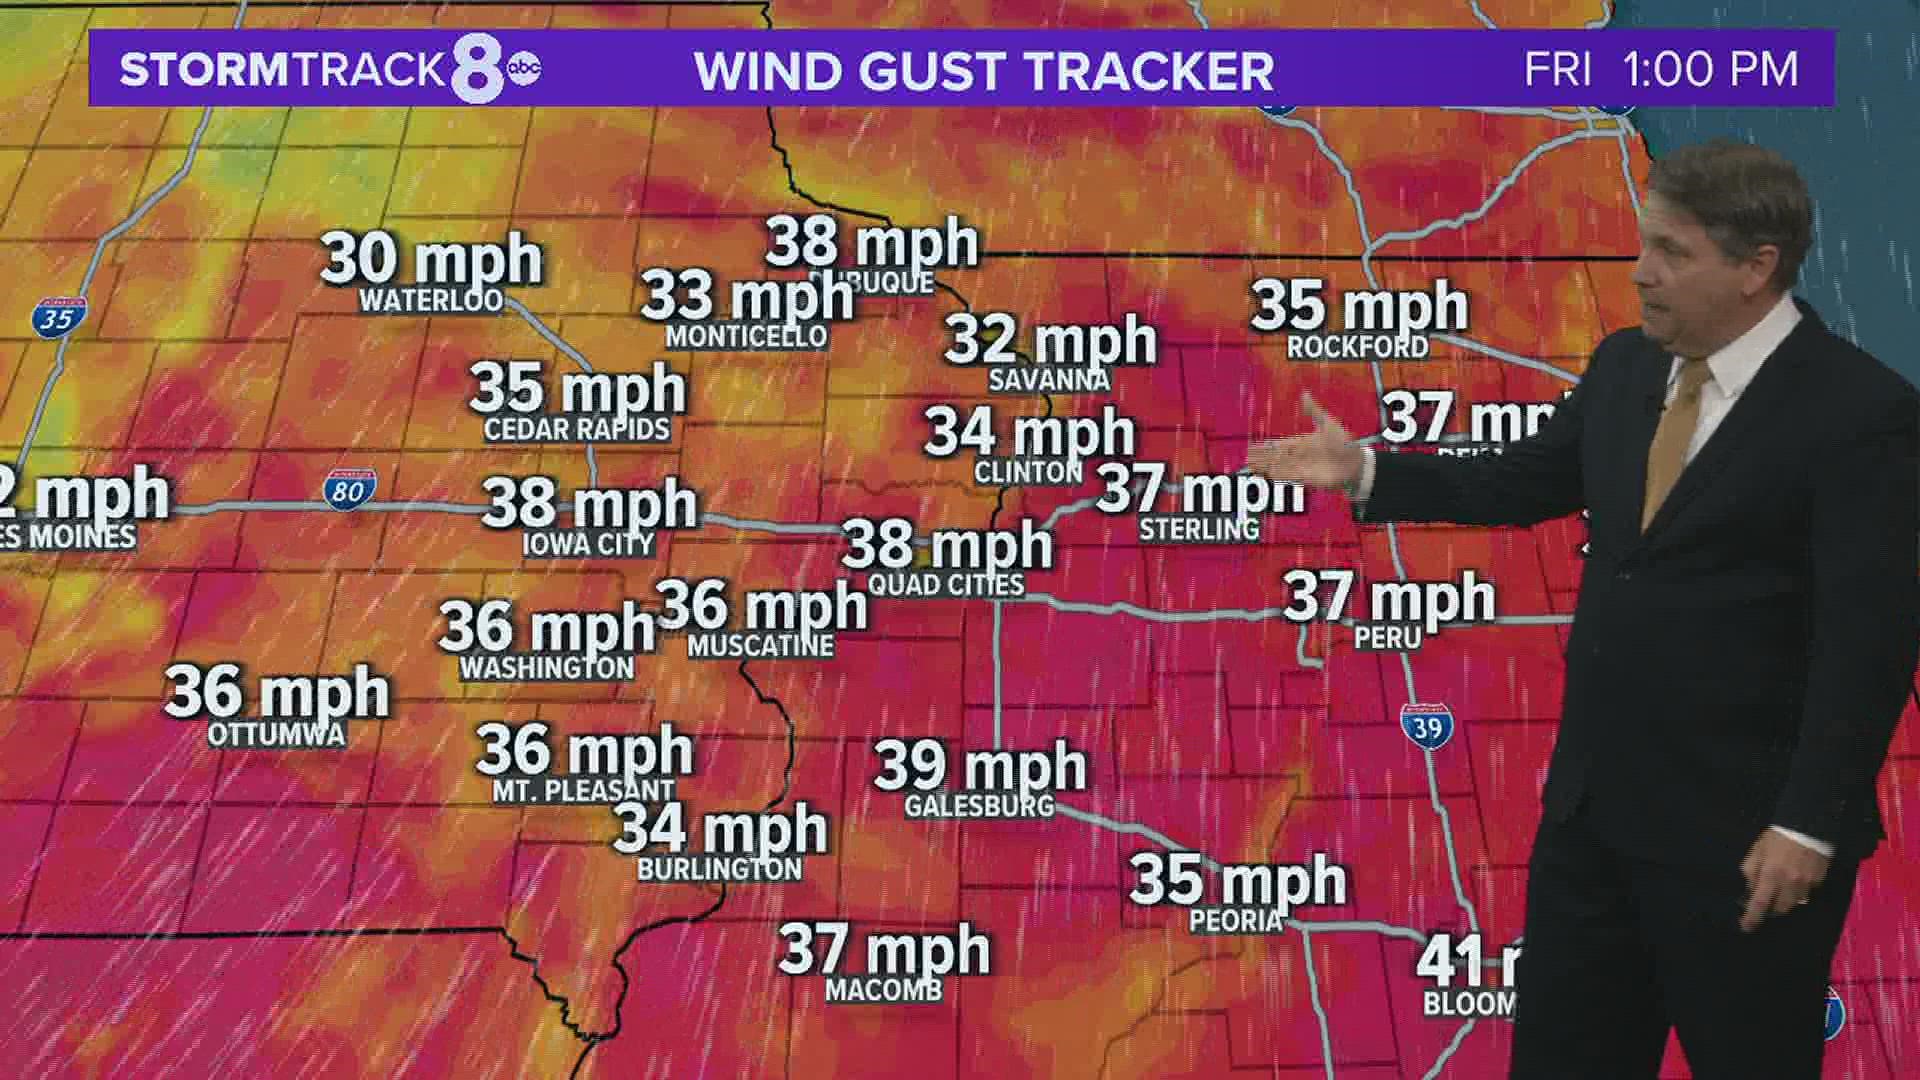 Warmer winds on track Friday... Gusts over 35 mph in spots.